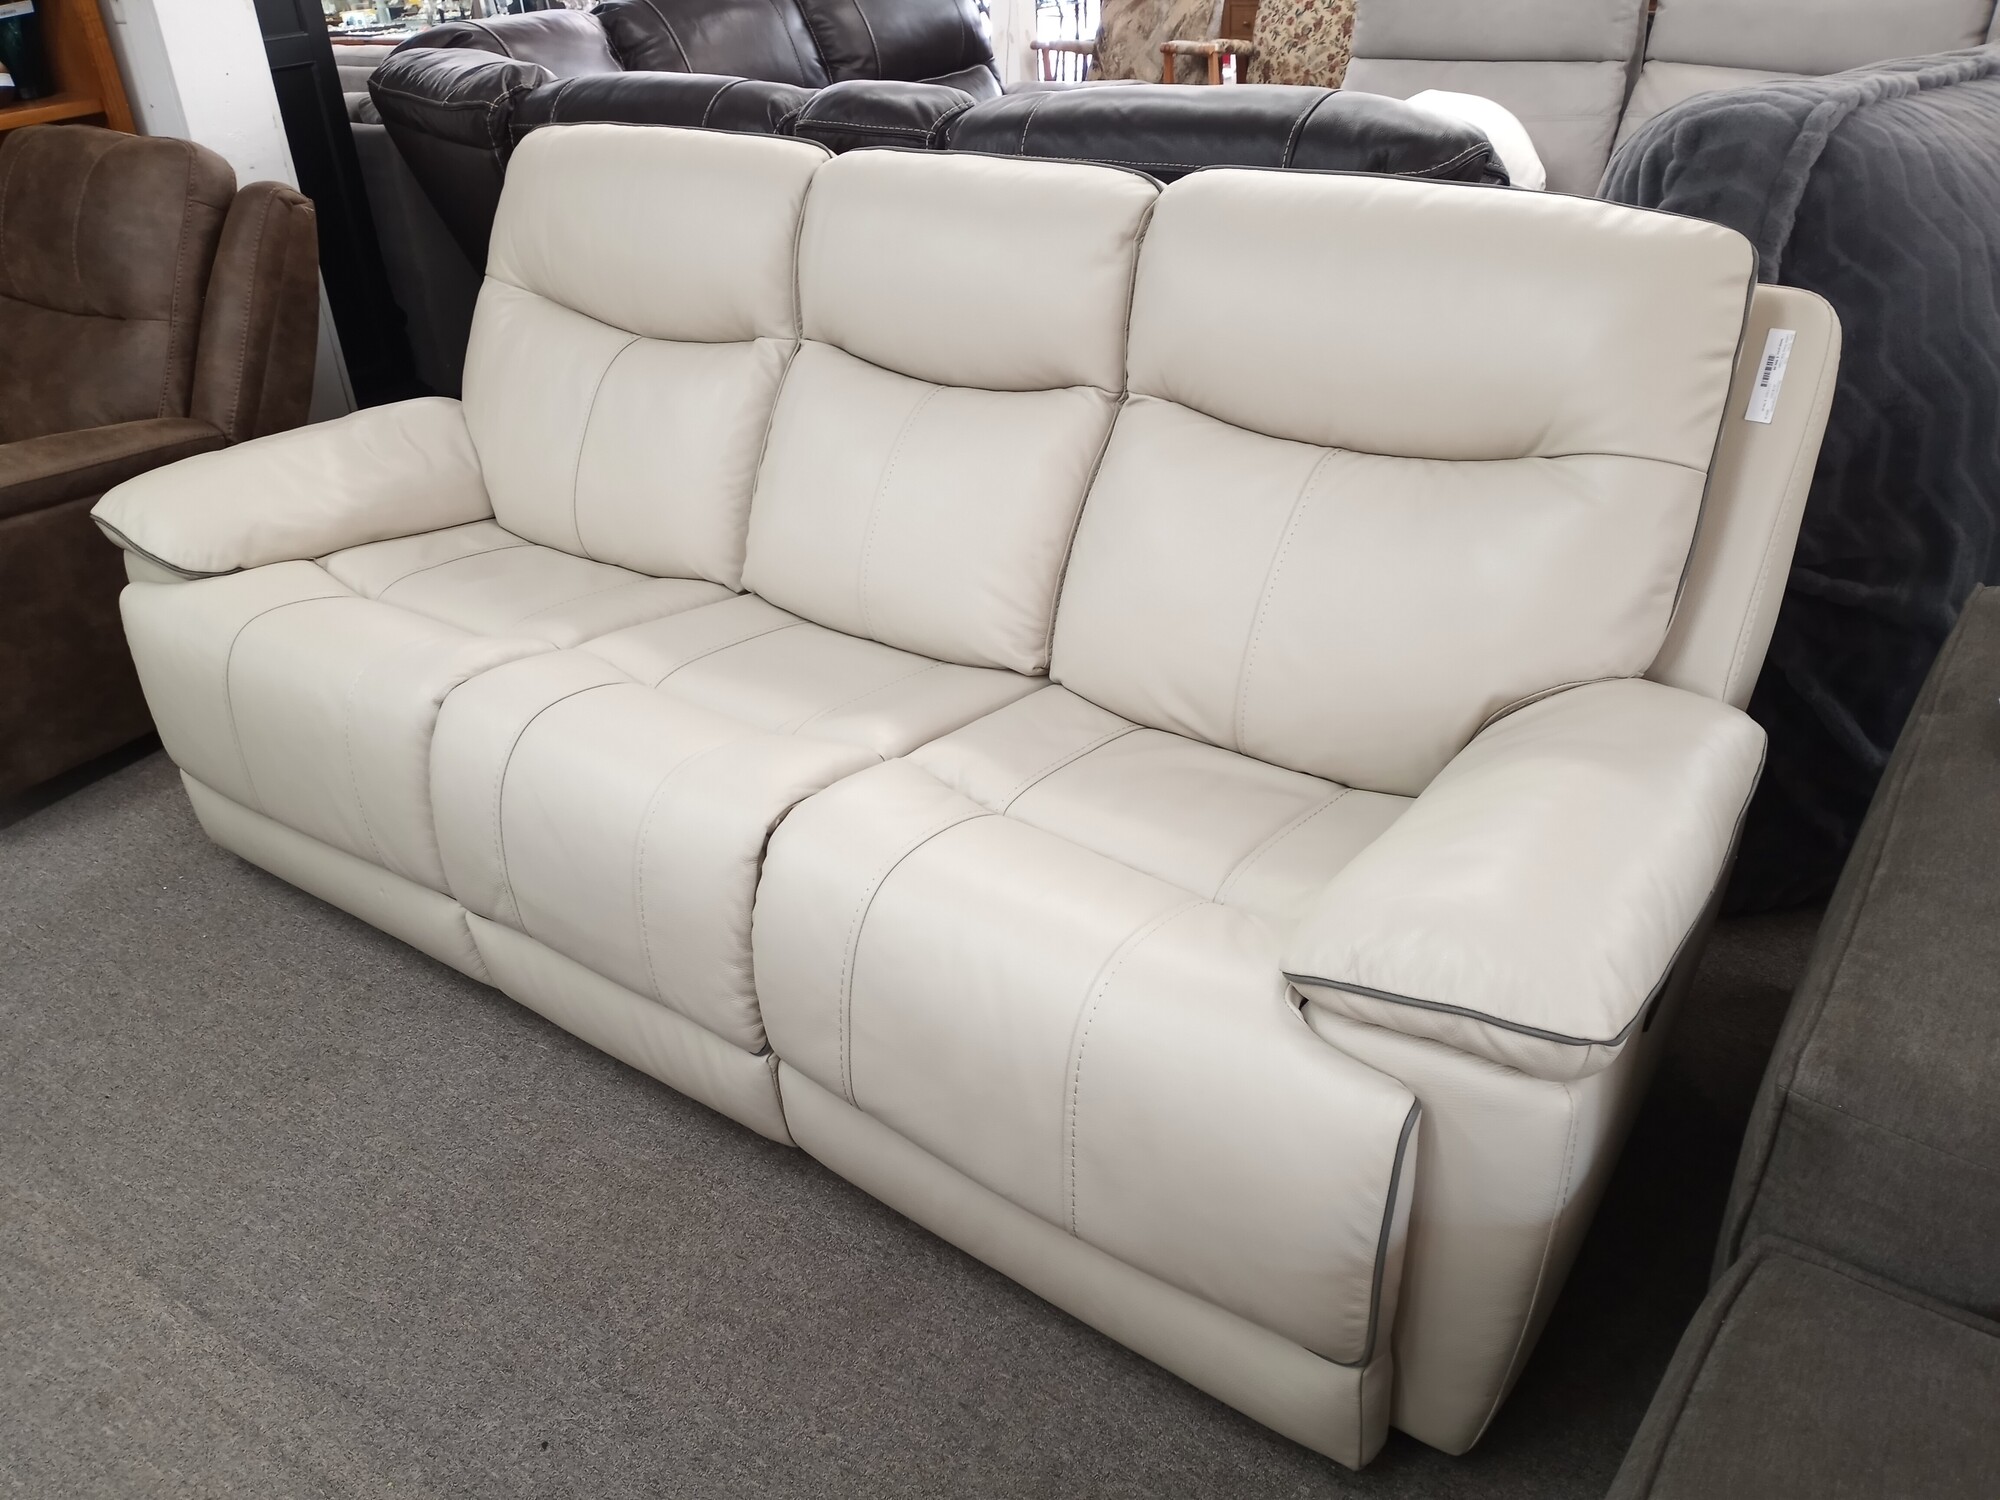 Leather Power Sofa Cream double recliner and power headrest.Features:

    Color: Cream
    Material: Top grain leather with vinyl match on sides and back
    Two USB ports
    Two power recliners with power headrests
    Leggett & Platt ® reclining mechanism
    CloudZero™ elevates legs higher, reducing back stress